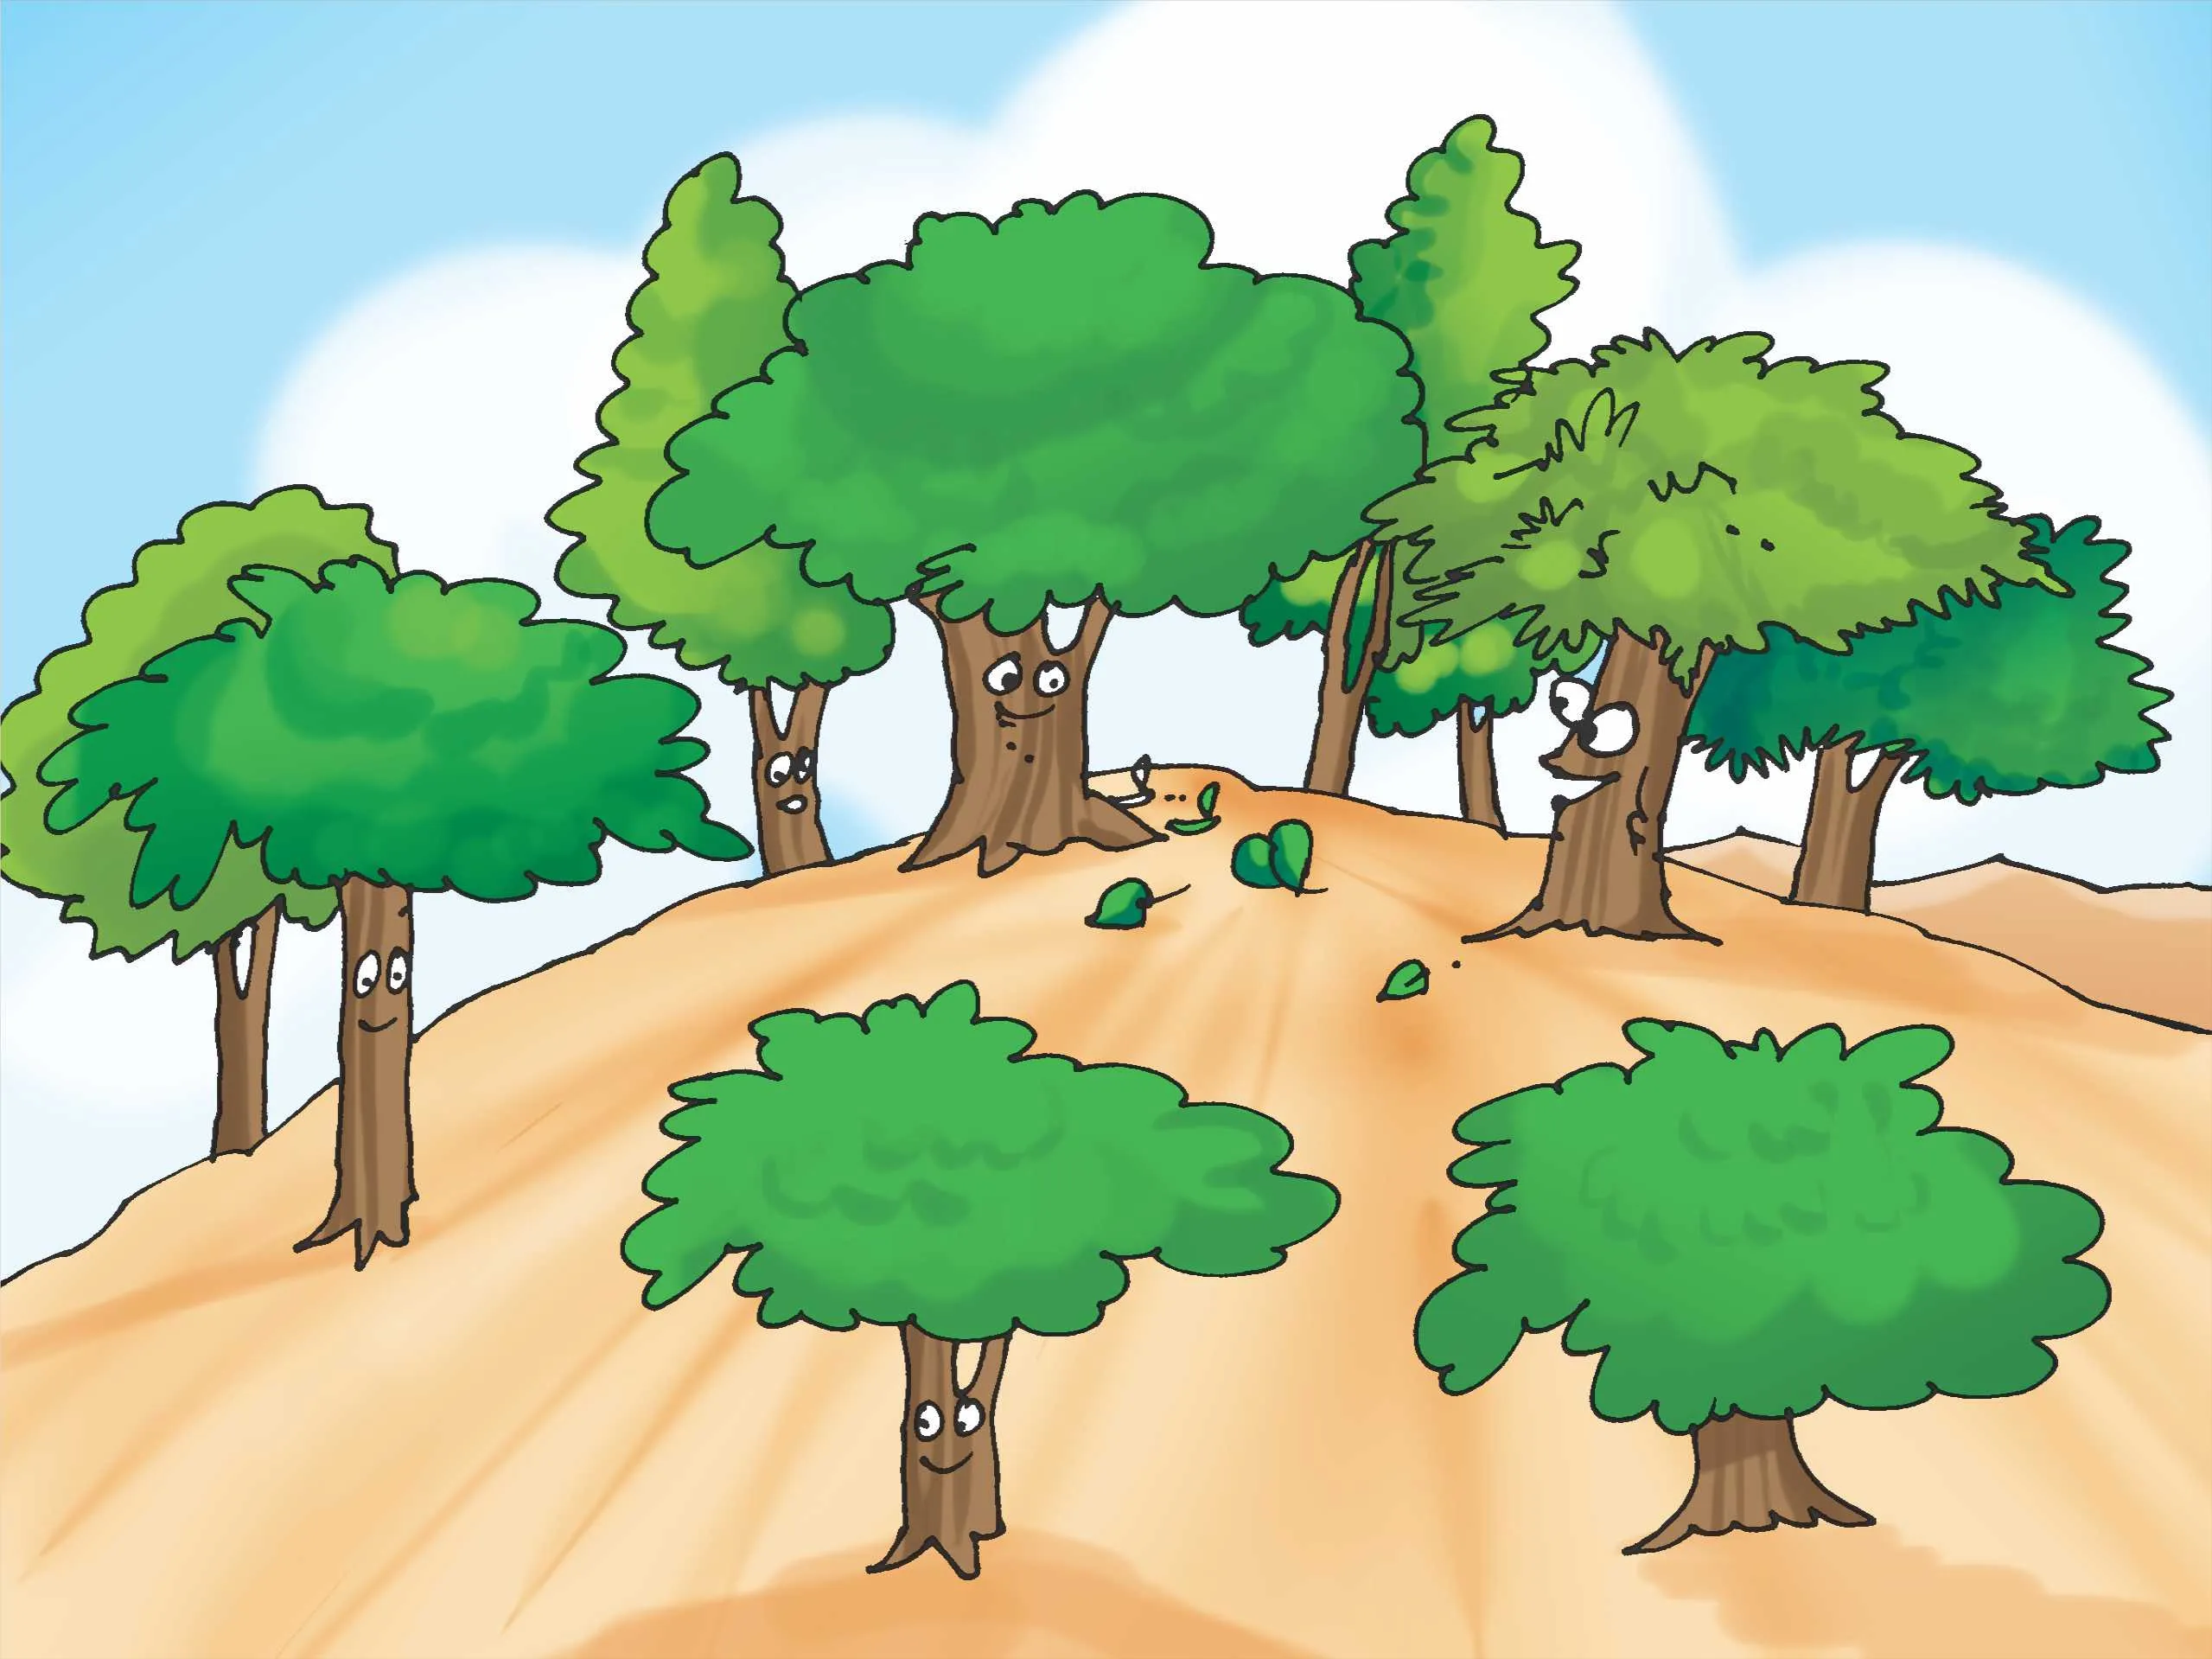 Trees on mountain top cartoon images